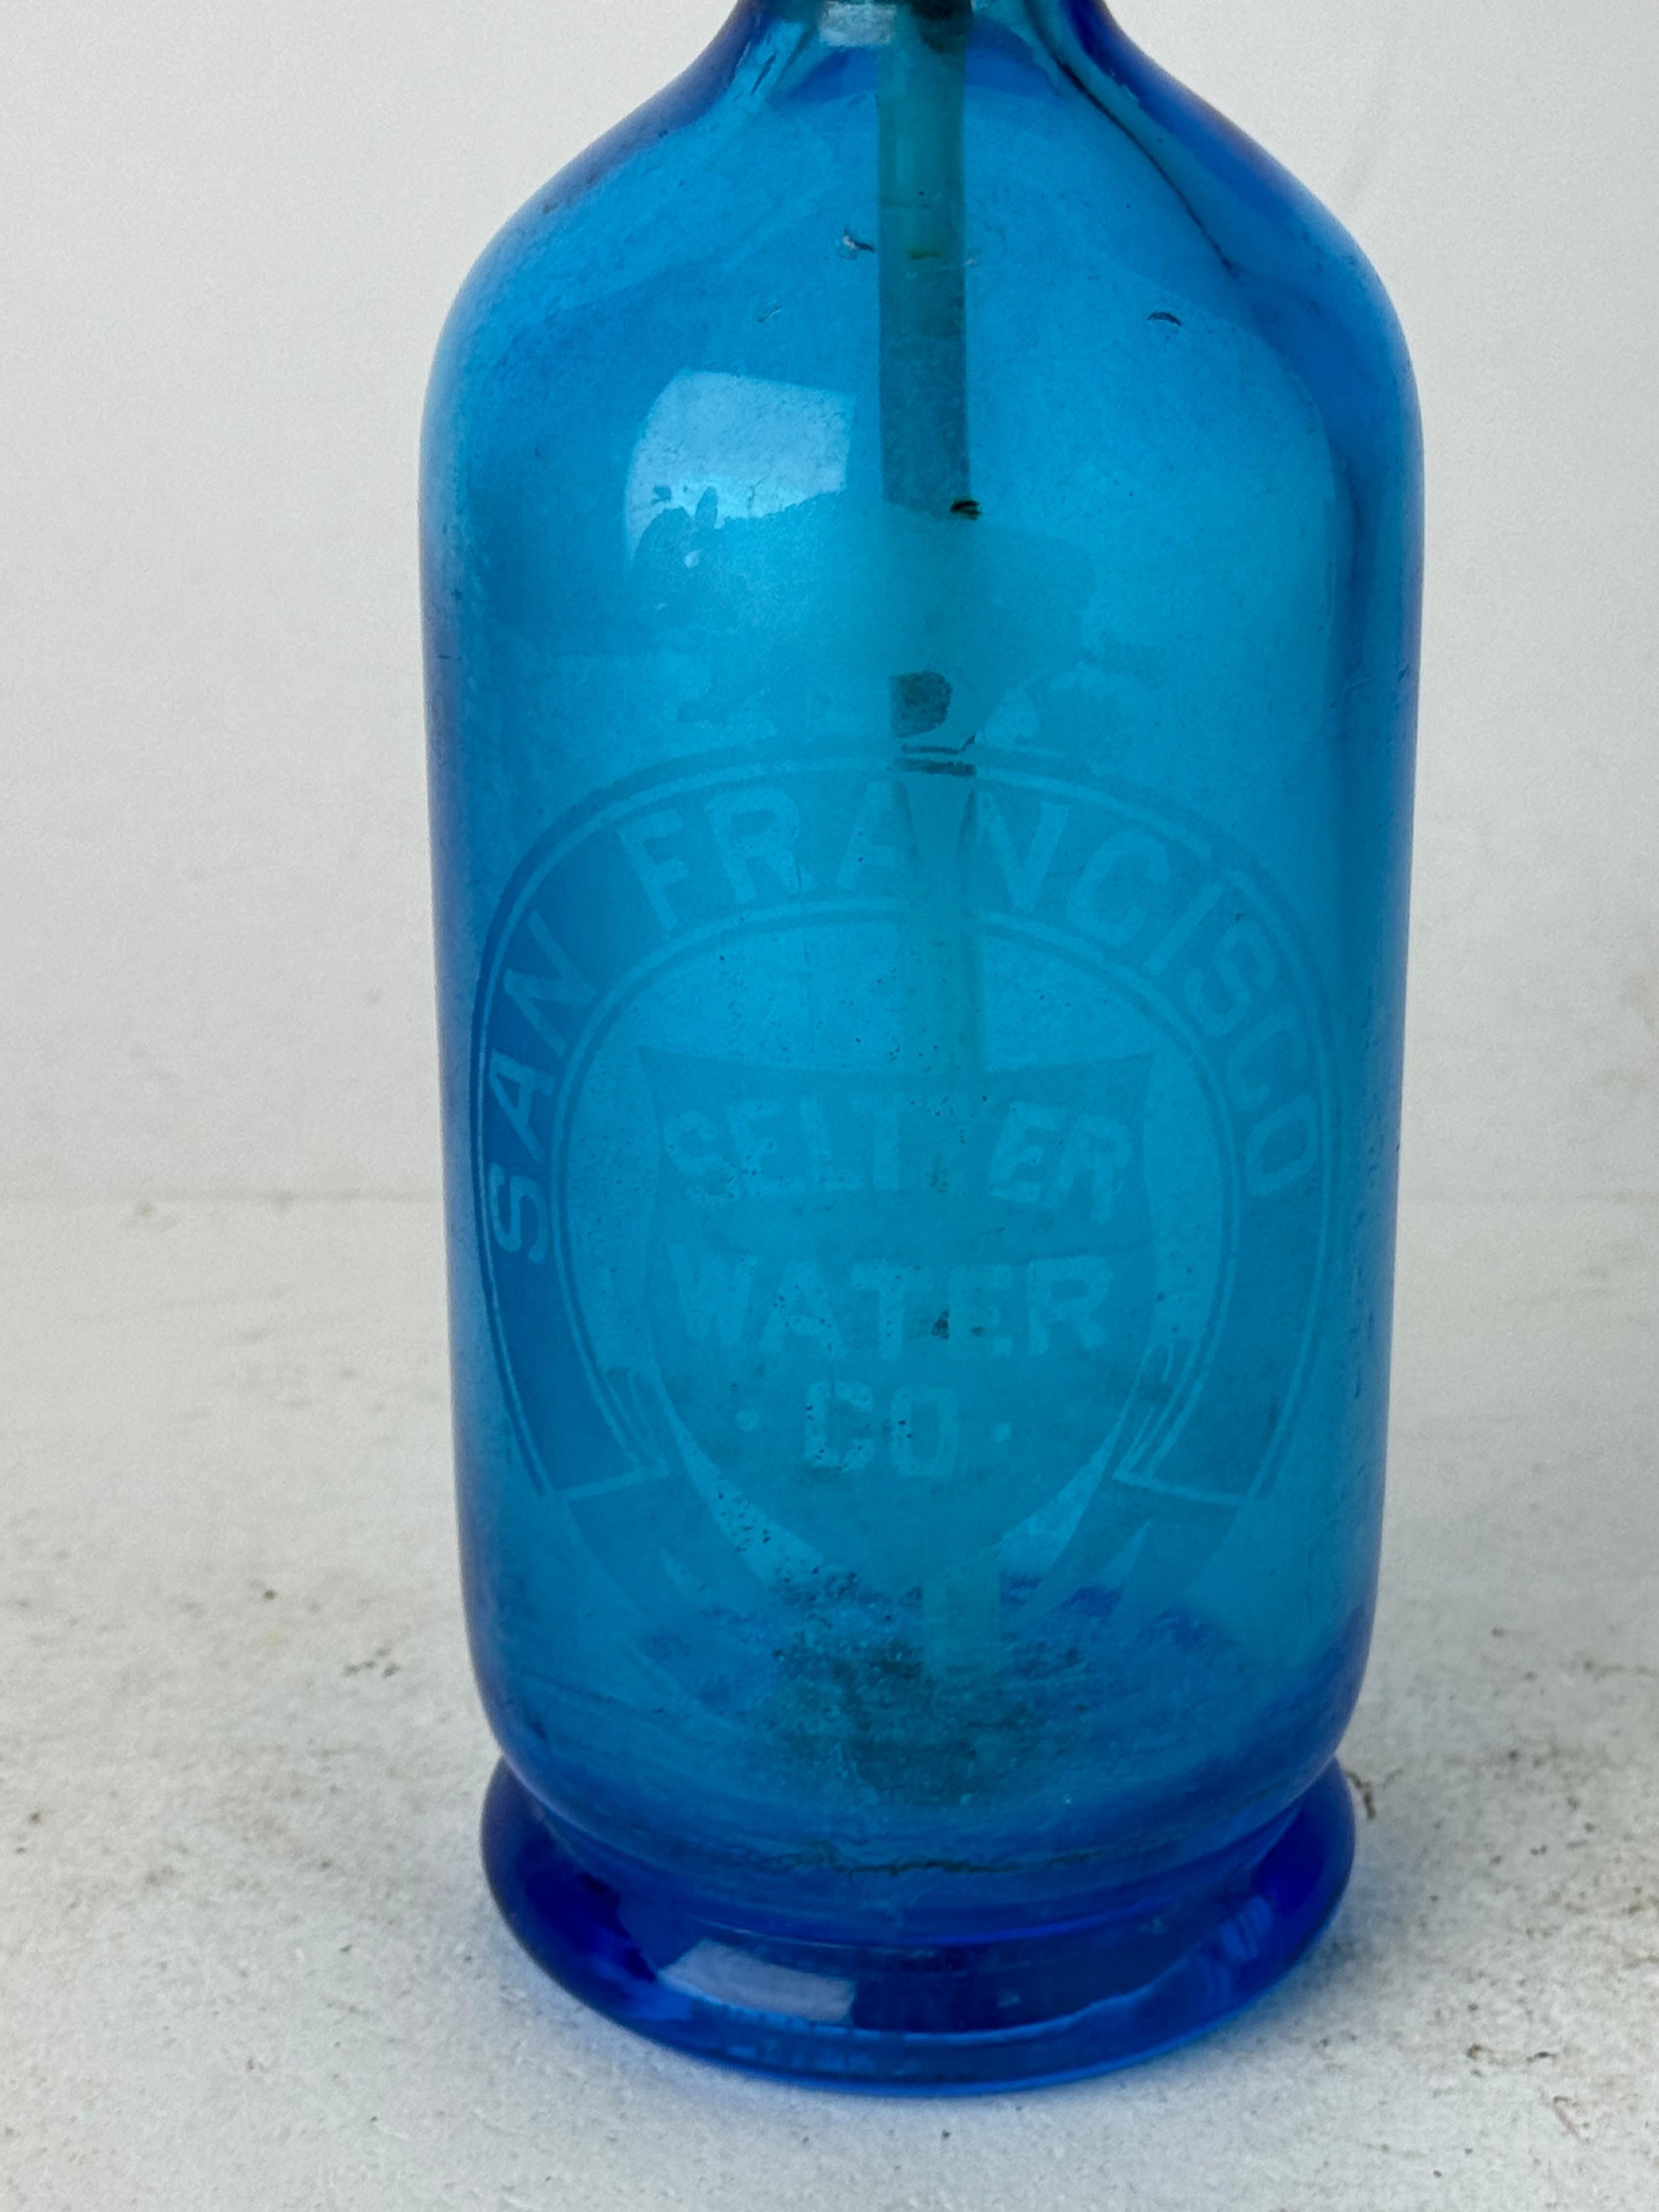 Add a touch of old-world charm to your home bar or display with our captivating antique/vintage blue glass seltzer bottle, crafted in Austria for the prestigious San Francisco Seltzer Water Company. This stunning piece not only serves as a